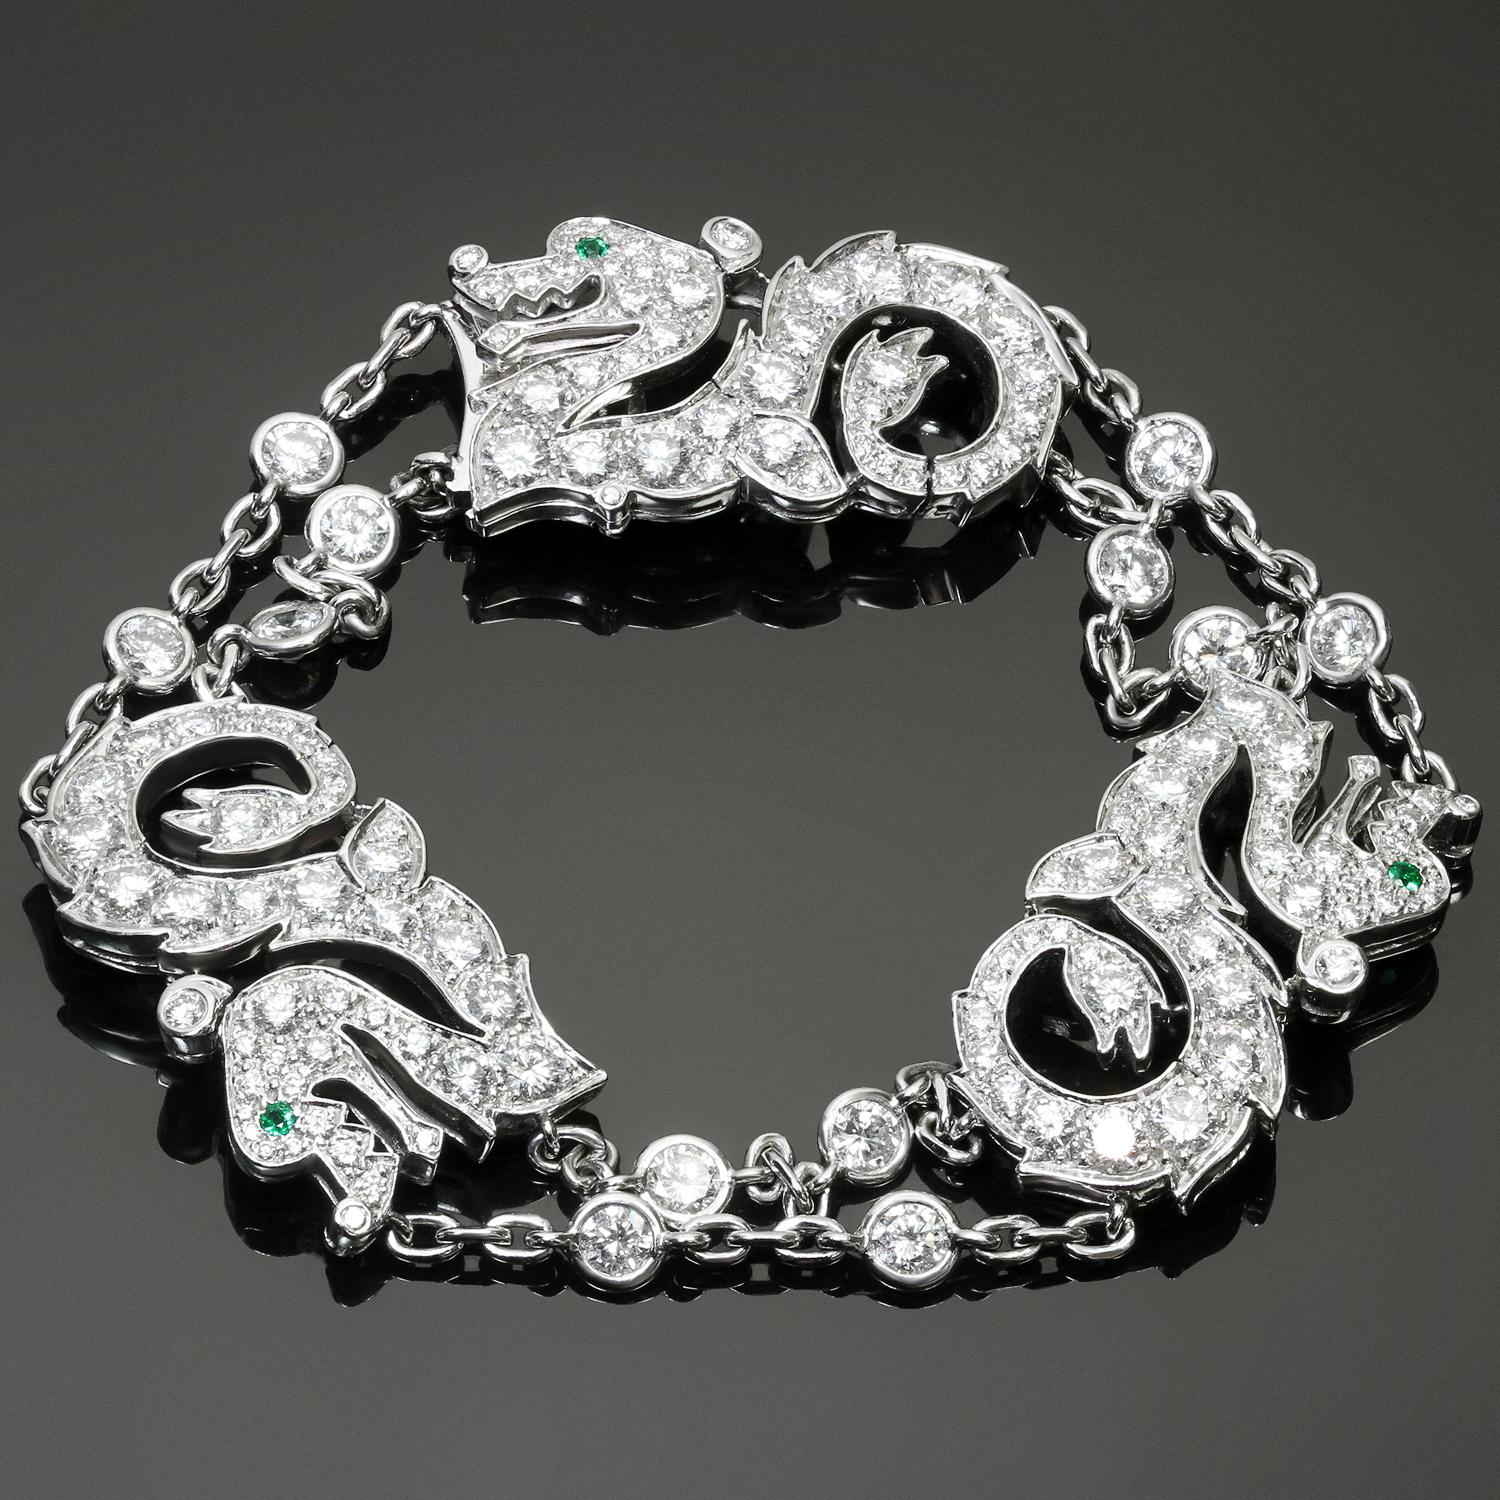 This iconic Cartier bracelet features three dragons crafted in 18k white gold, set with brilliant-cut round diamonds, accented with circular-cut emerald eyes and completed with a double cable-link chain, spectacle-set with brilliant-cut diamonds.